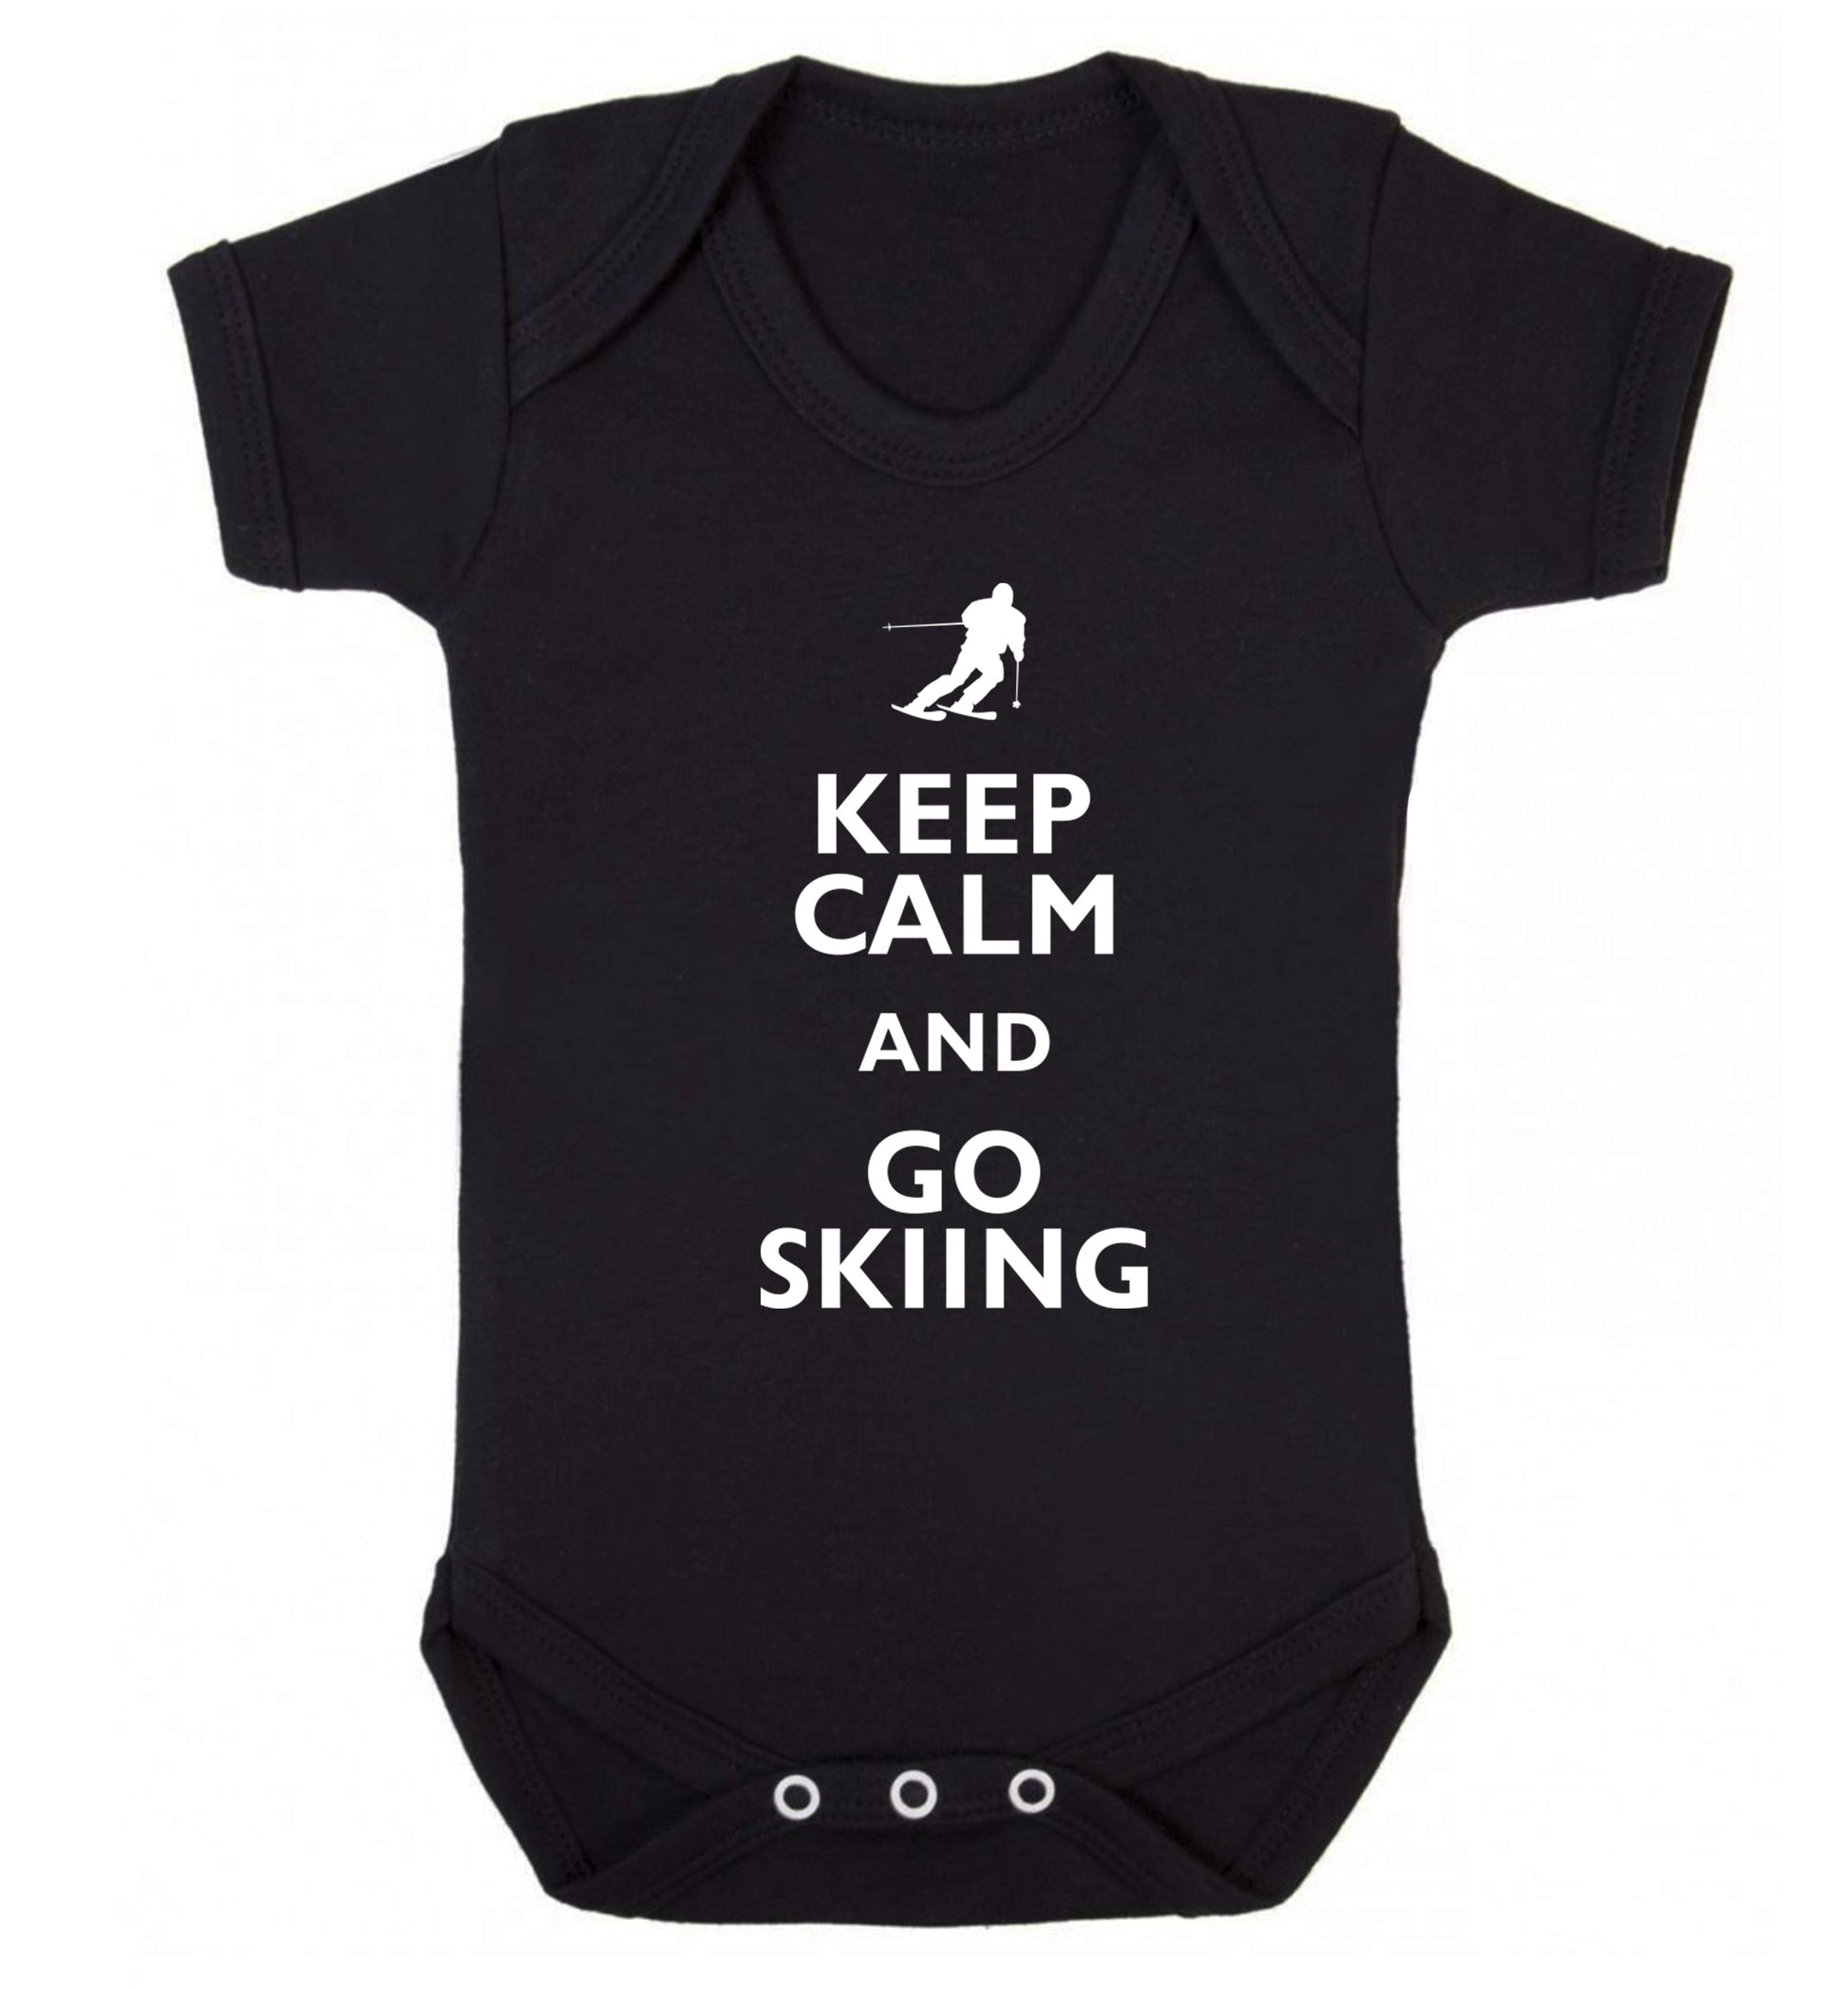 Keep calm and go skiing Baby Vest black 18-24 months